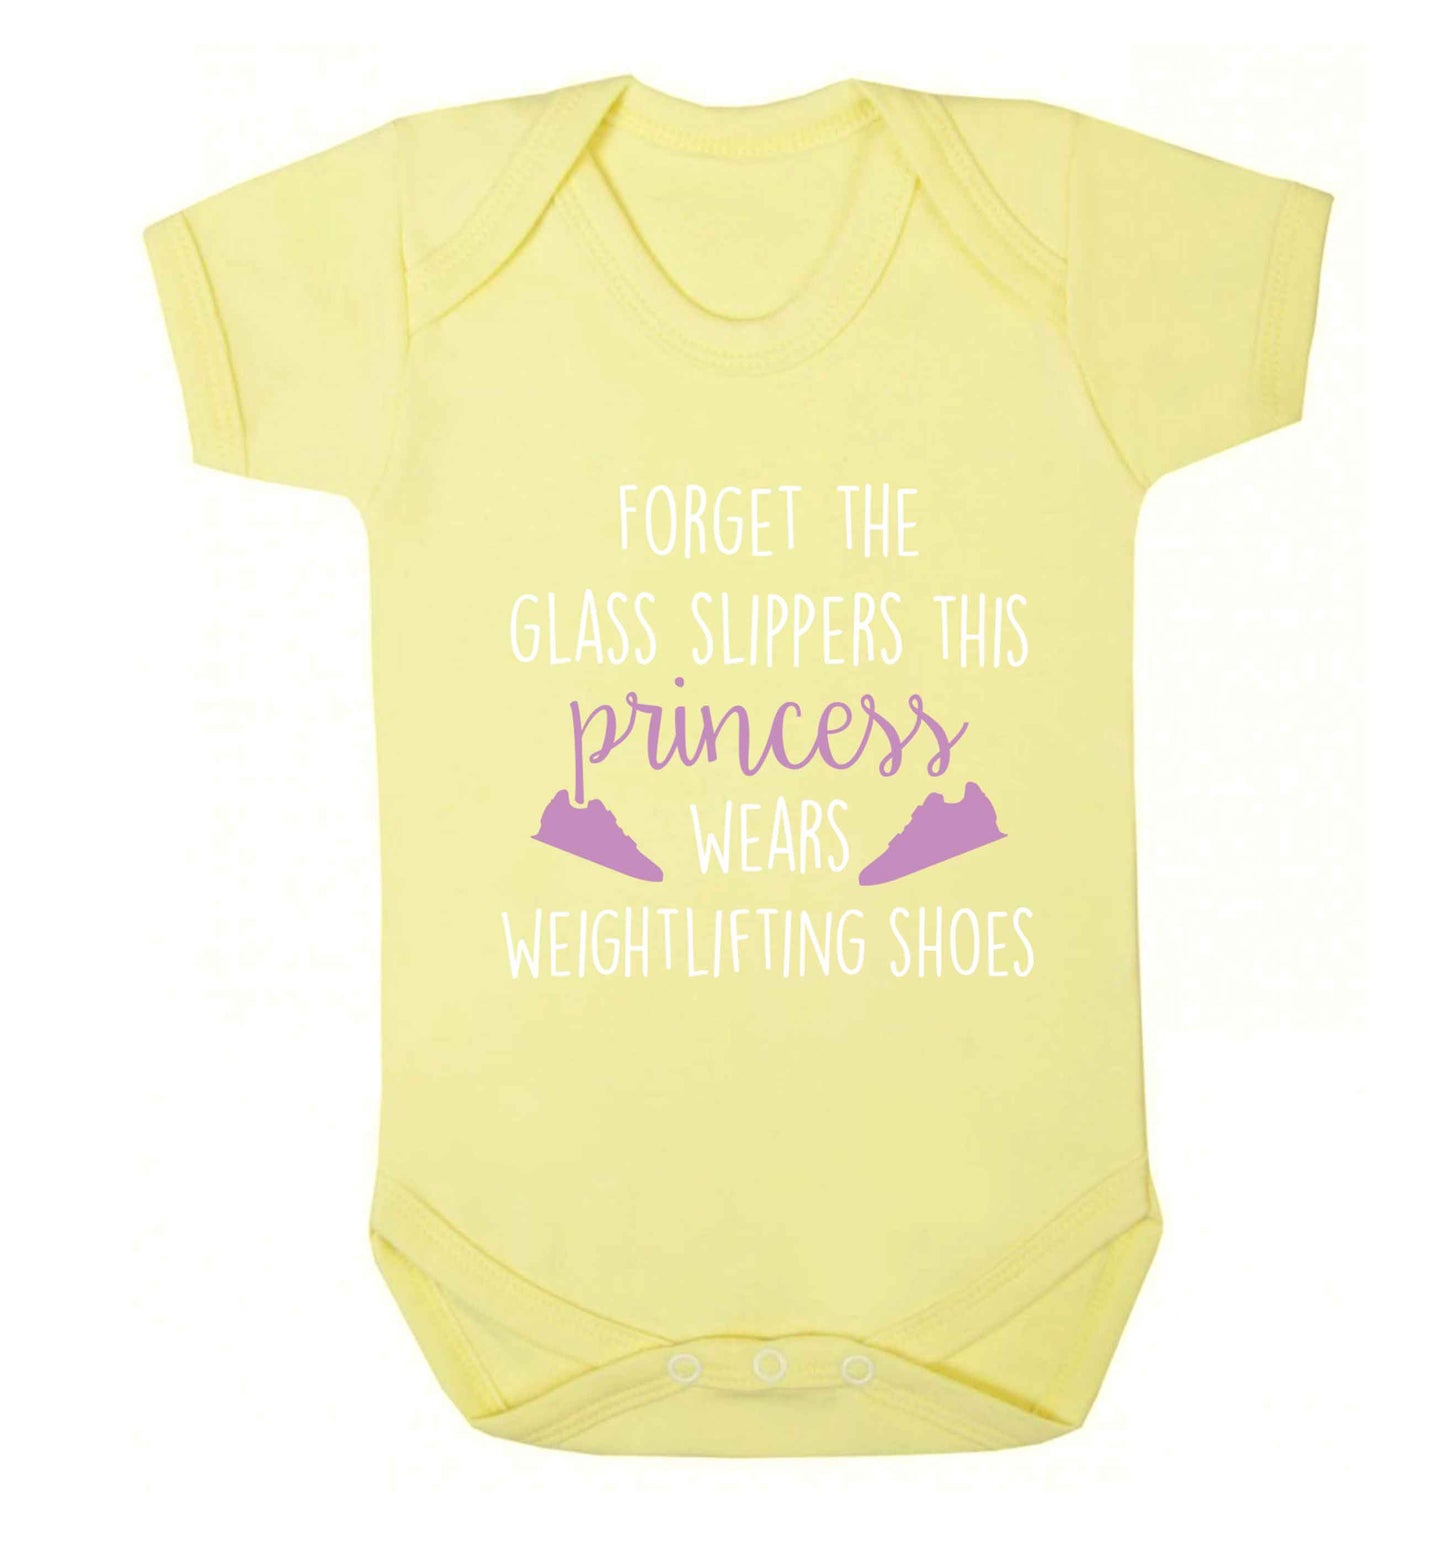 Forget the glass slippers this princess wears weightlifting shoes Baby Vest pale yellow 18-24 months